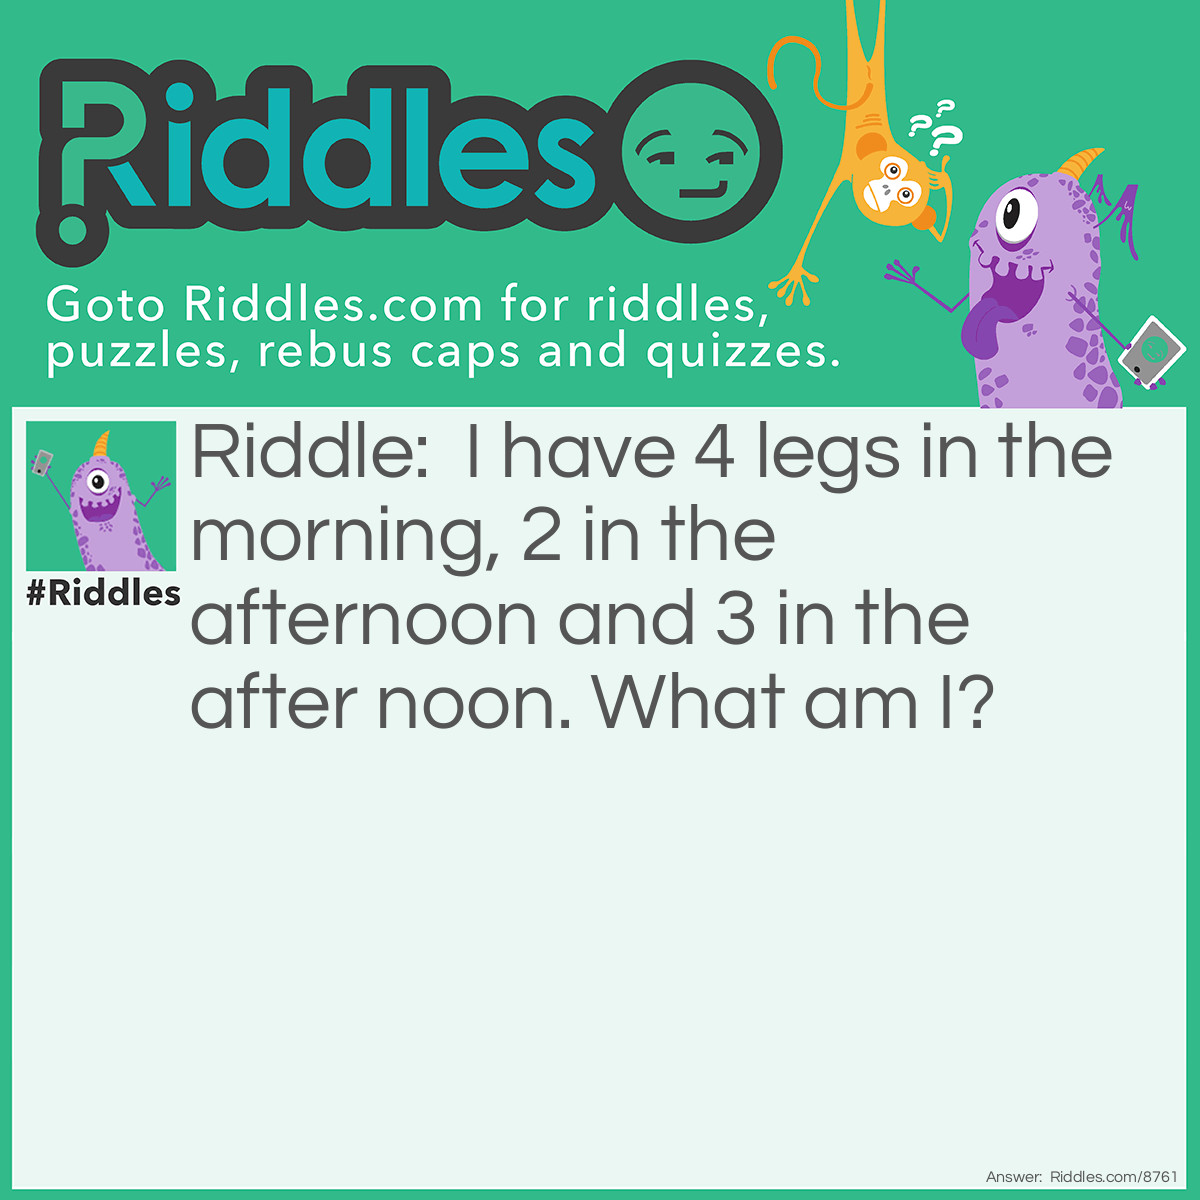 Riddle: I have 4 legs in the morning, 2 in the afternoon and 3 in the after noon. What am I? Answer: A human.